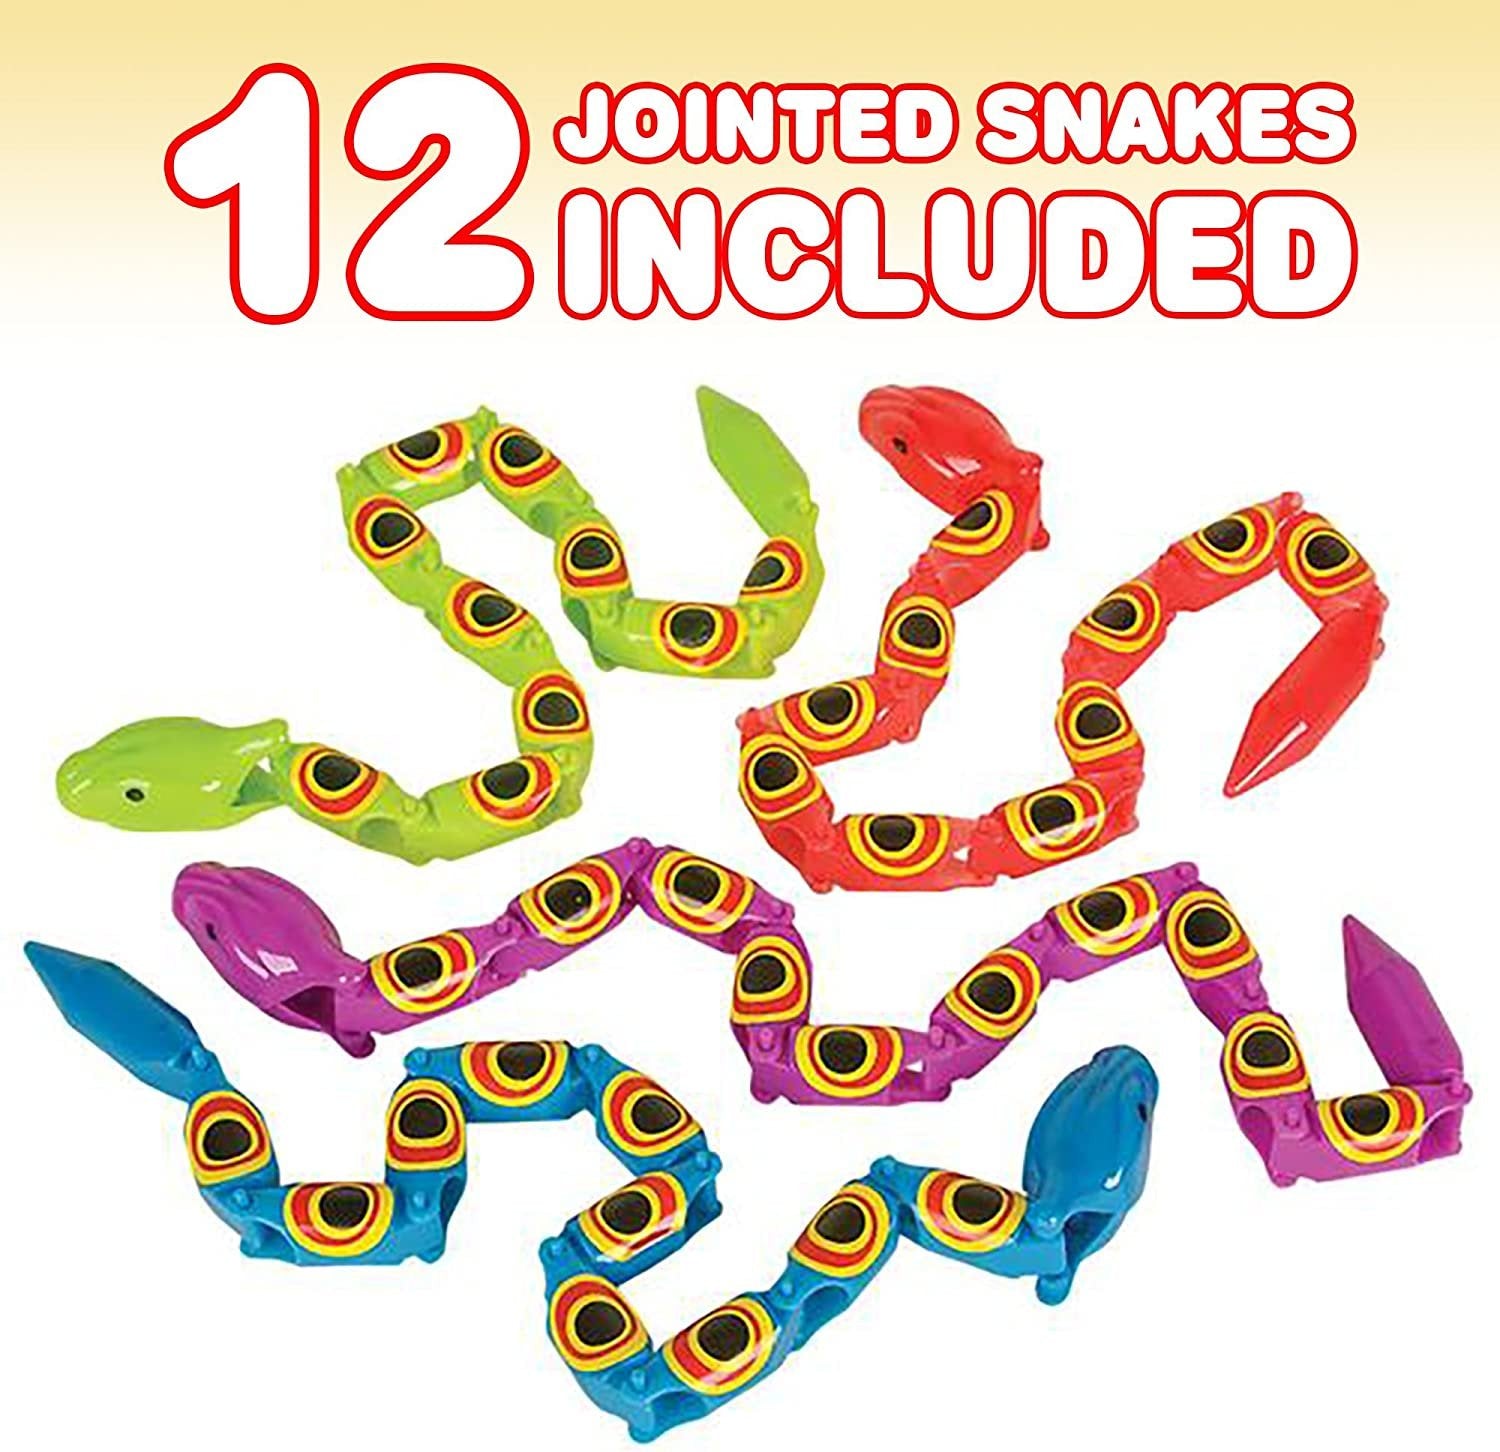 Jointed Snake Toys Set of 12 - 15" Long Plastic Snakes with Joining Pieces - Great Party Favor - Fidget Toy for Kids, Gift Idea for Boys and Girls, Carnival Prize - Sensory Toy